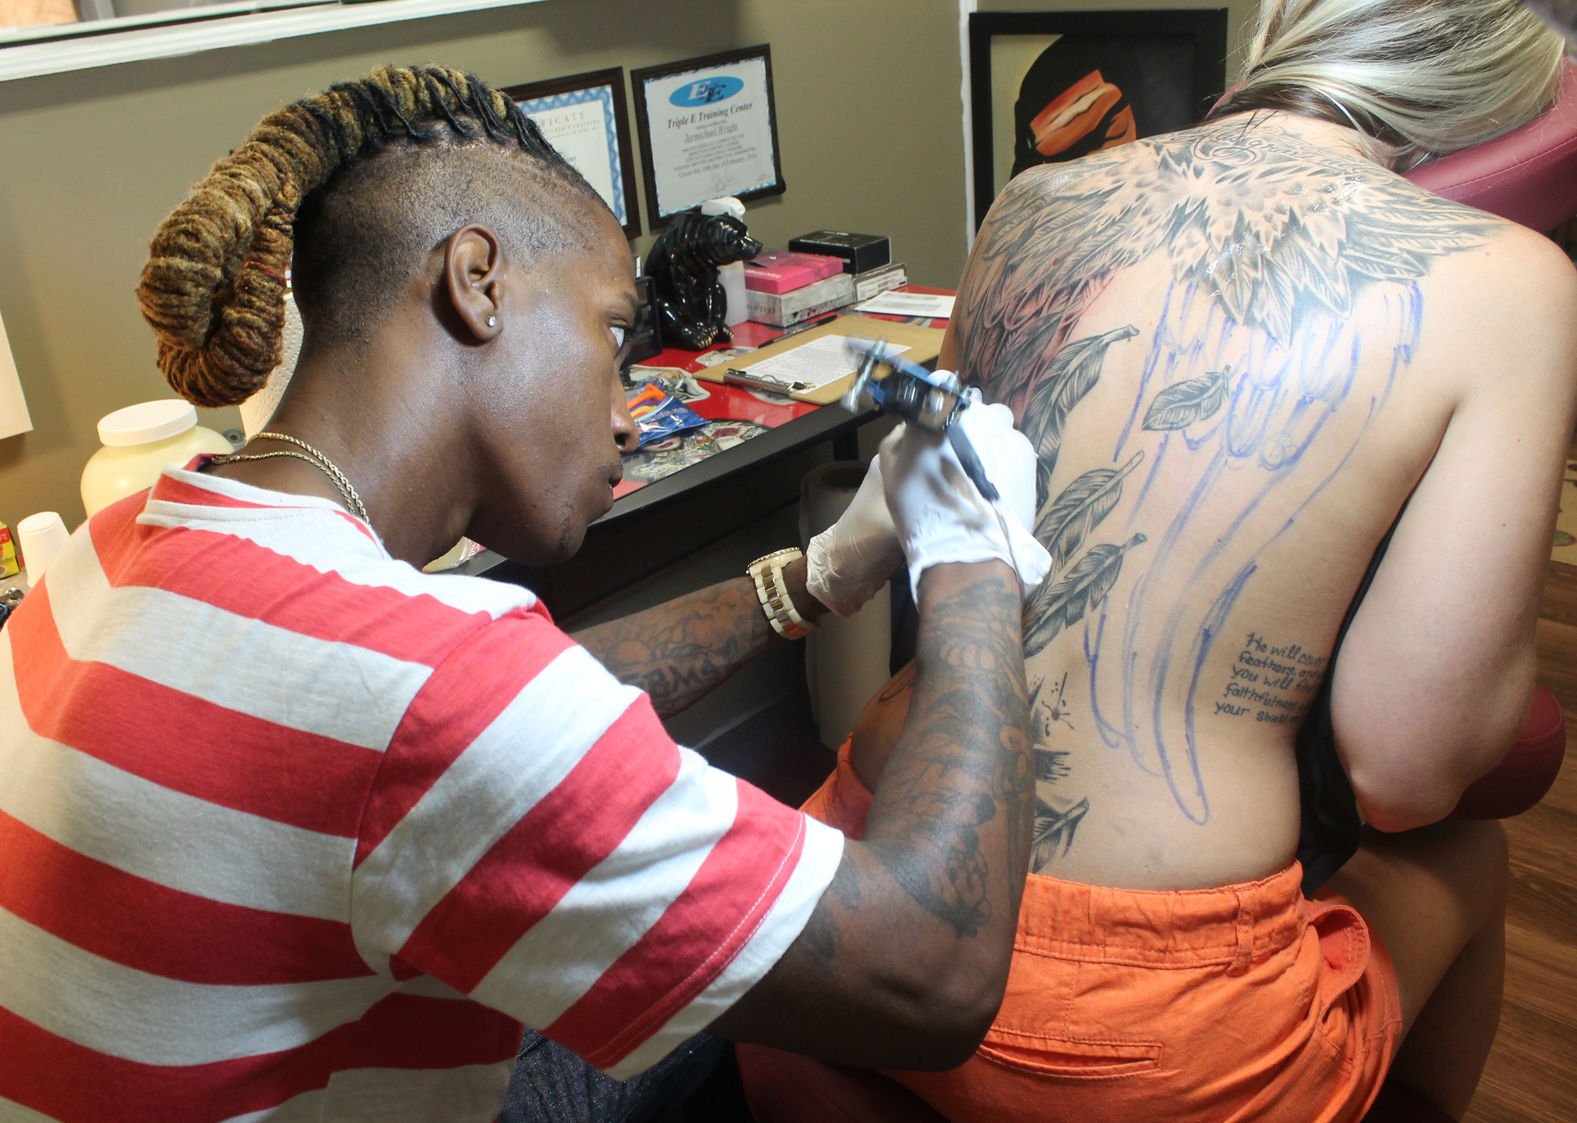 Spartanburg tattoo shops busy for variety of reasons